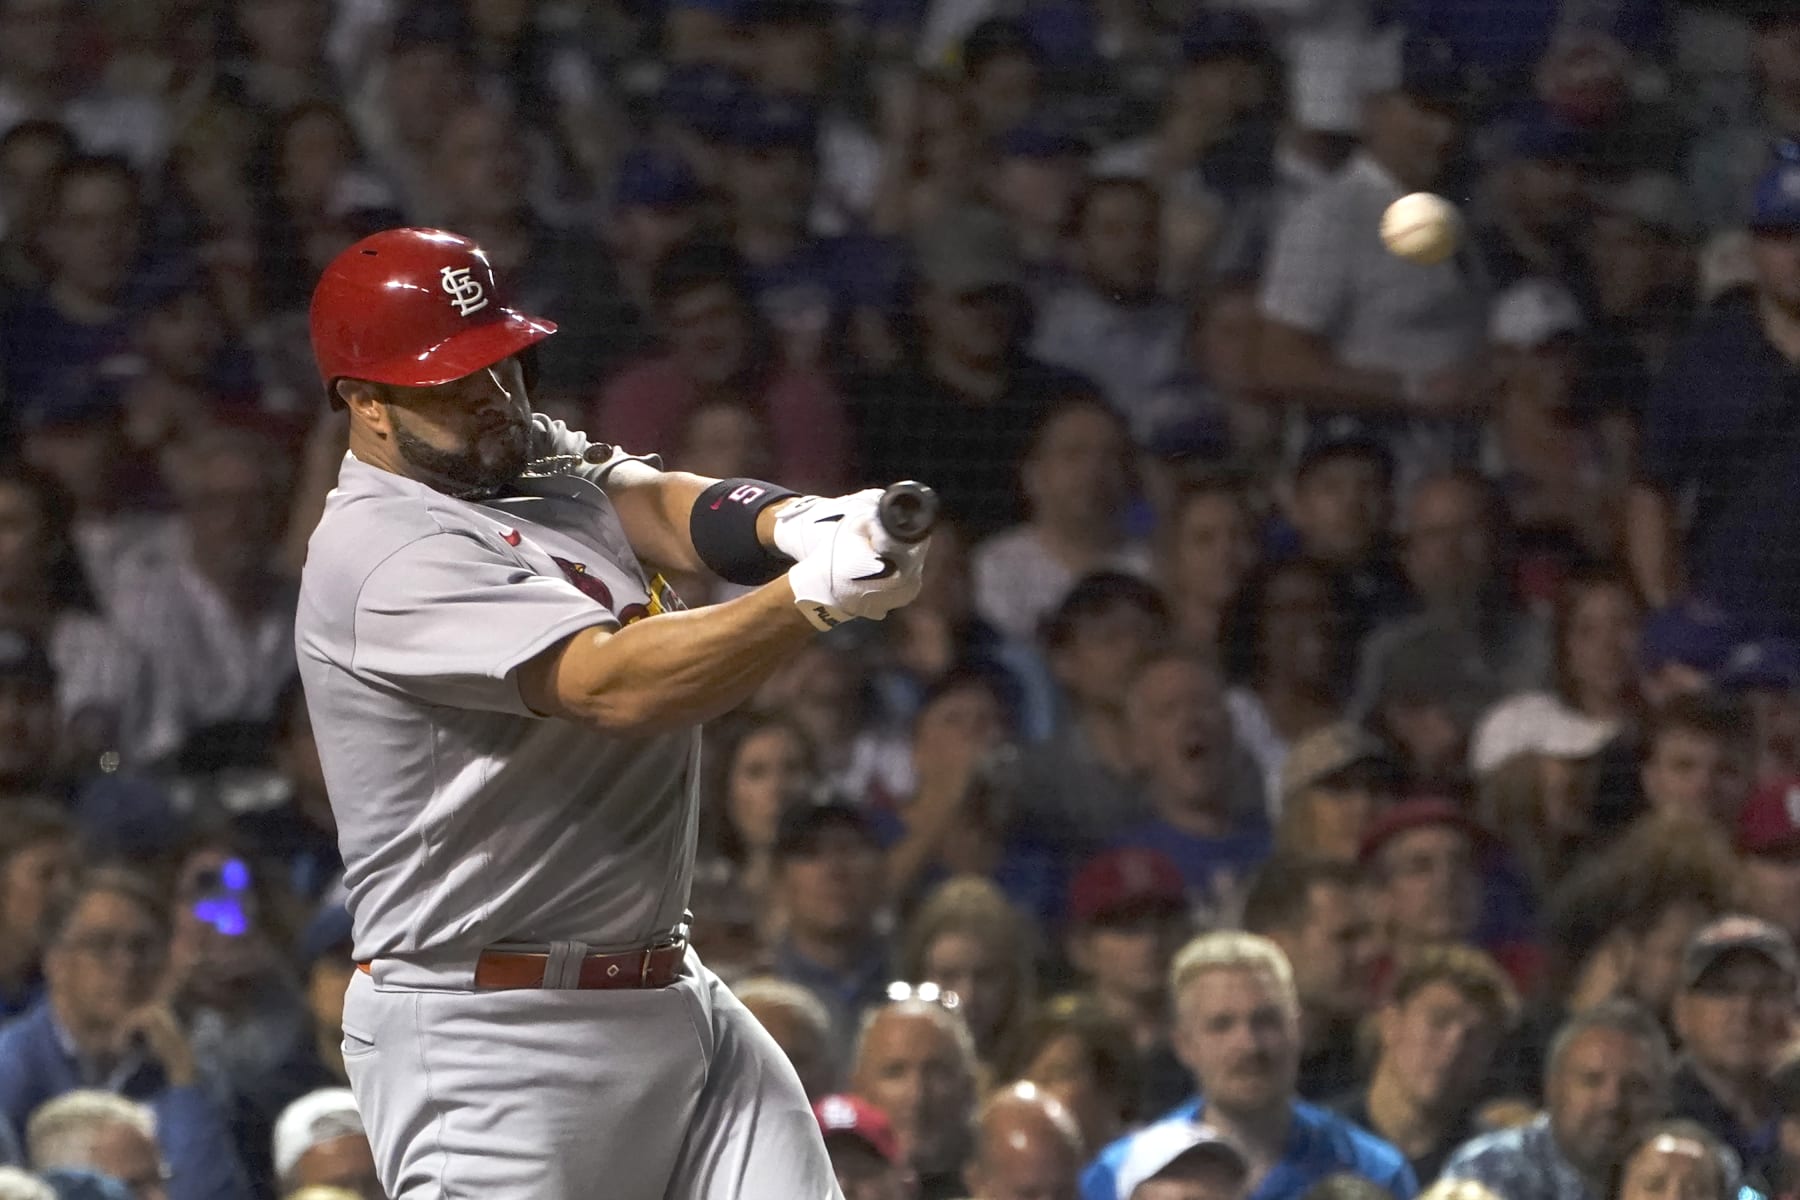 Albert Pujols Is Suddenly His Old Self Again—and Chasing 700 Career Home  Runs - WSJ